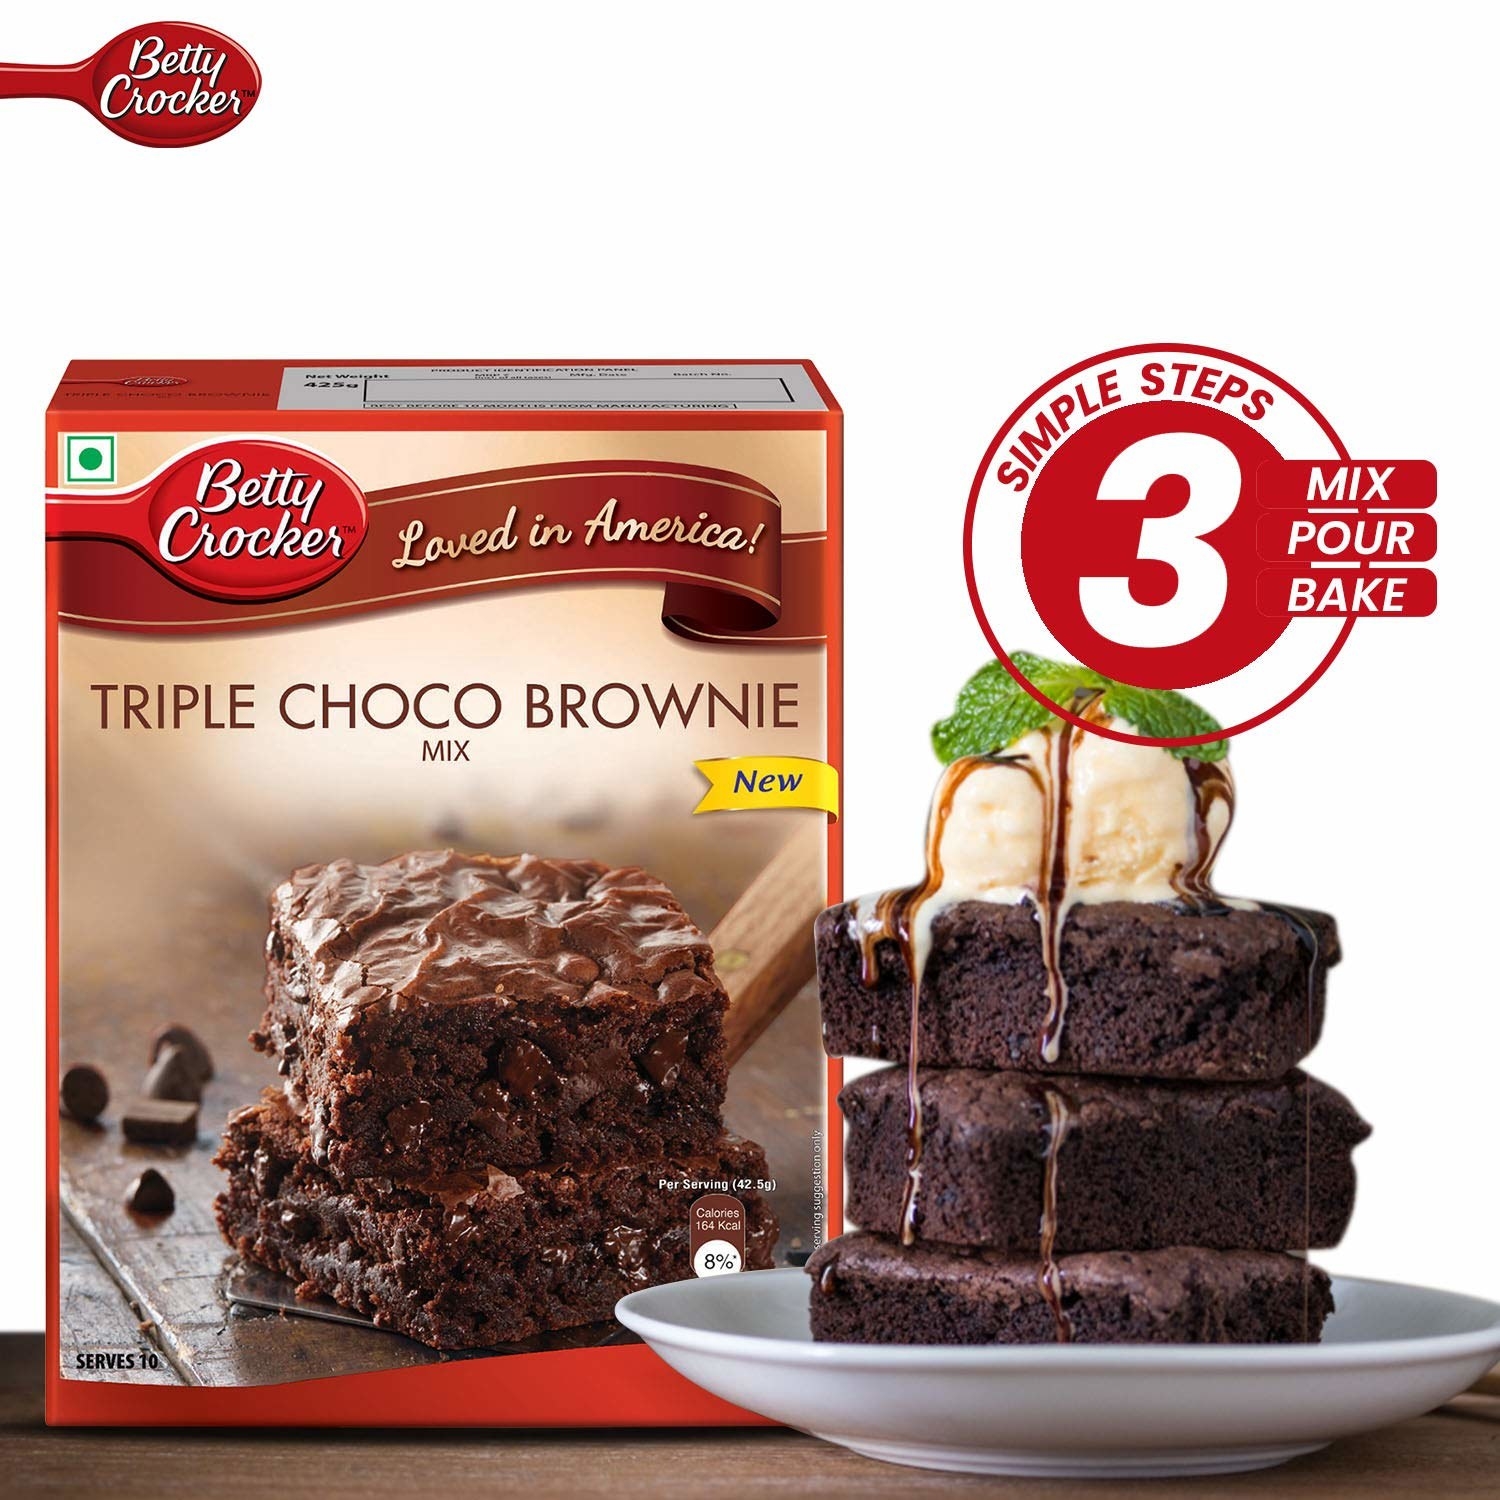 Brownie mix packet next to a plate of brownies with ice-cream on them.